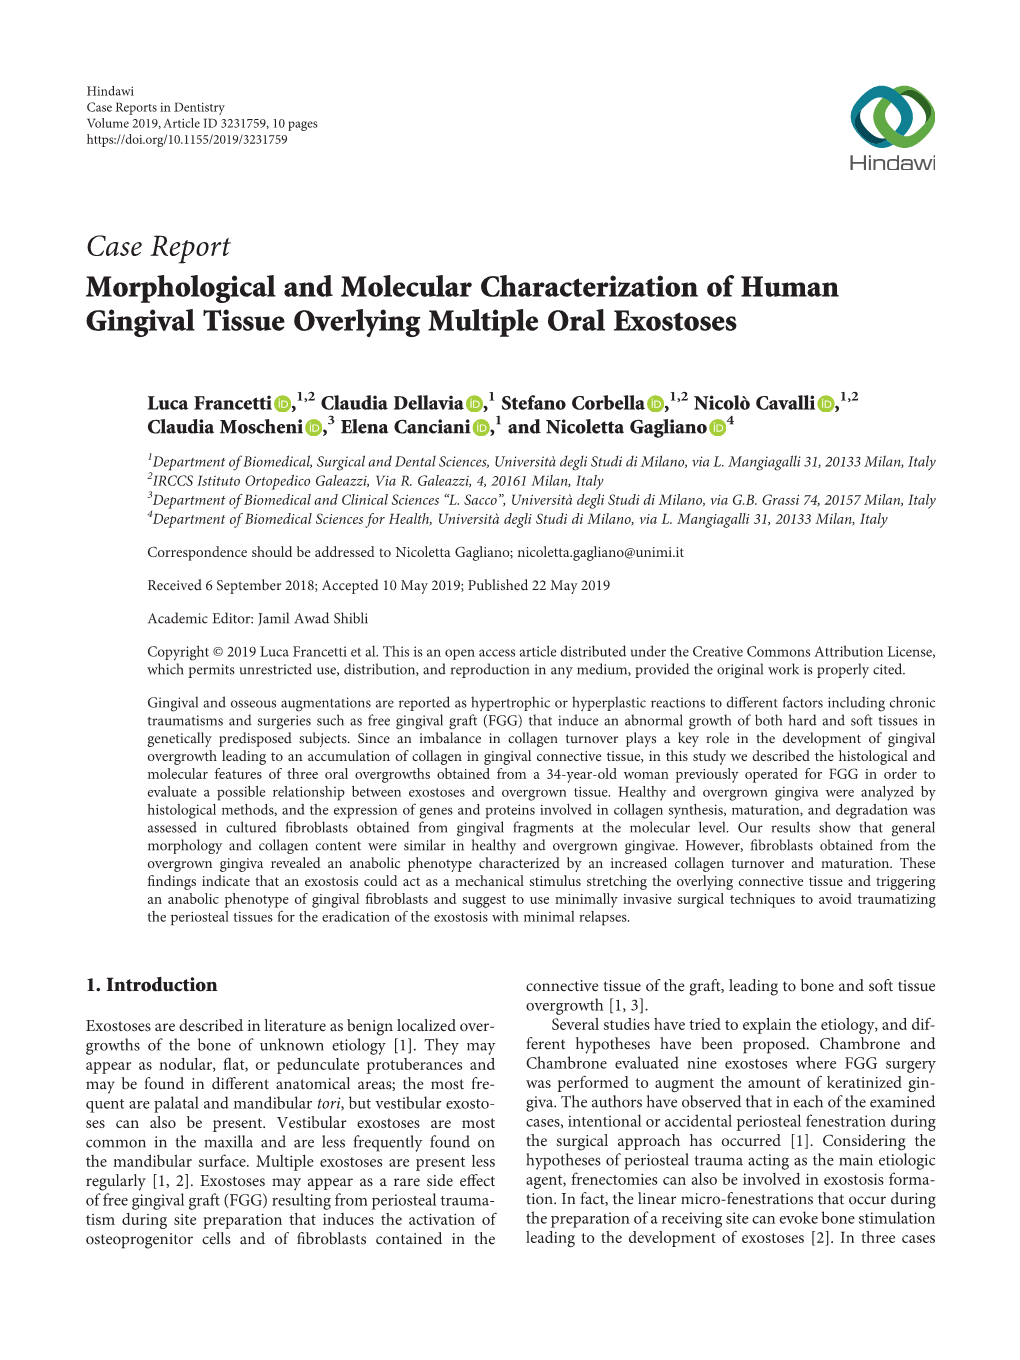 Case Report Morphological and Molecular Characterization of Human Gingival Tissue Overlying Multiple Oral Exostoses